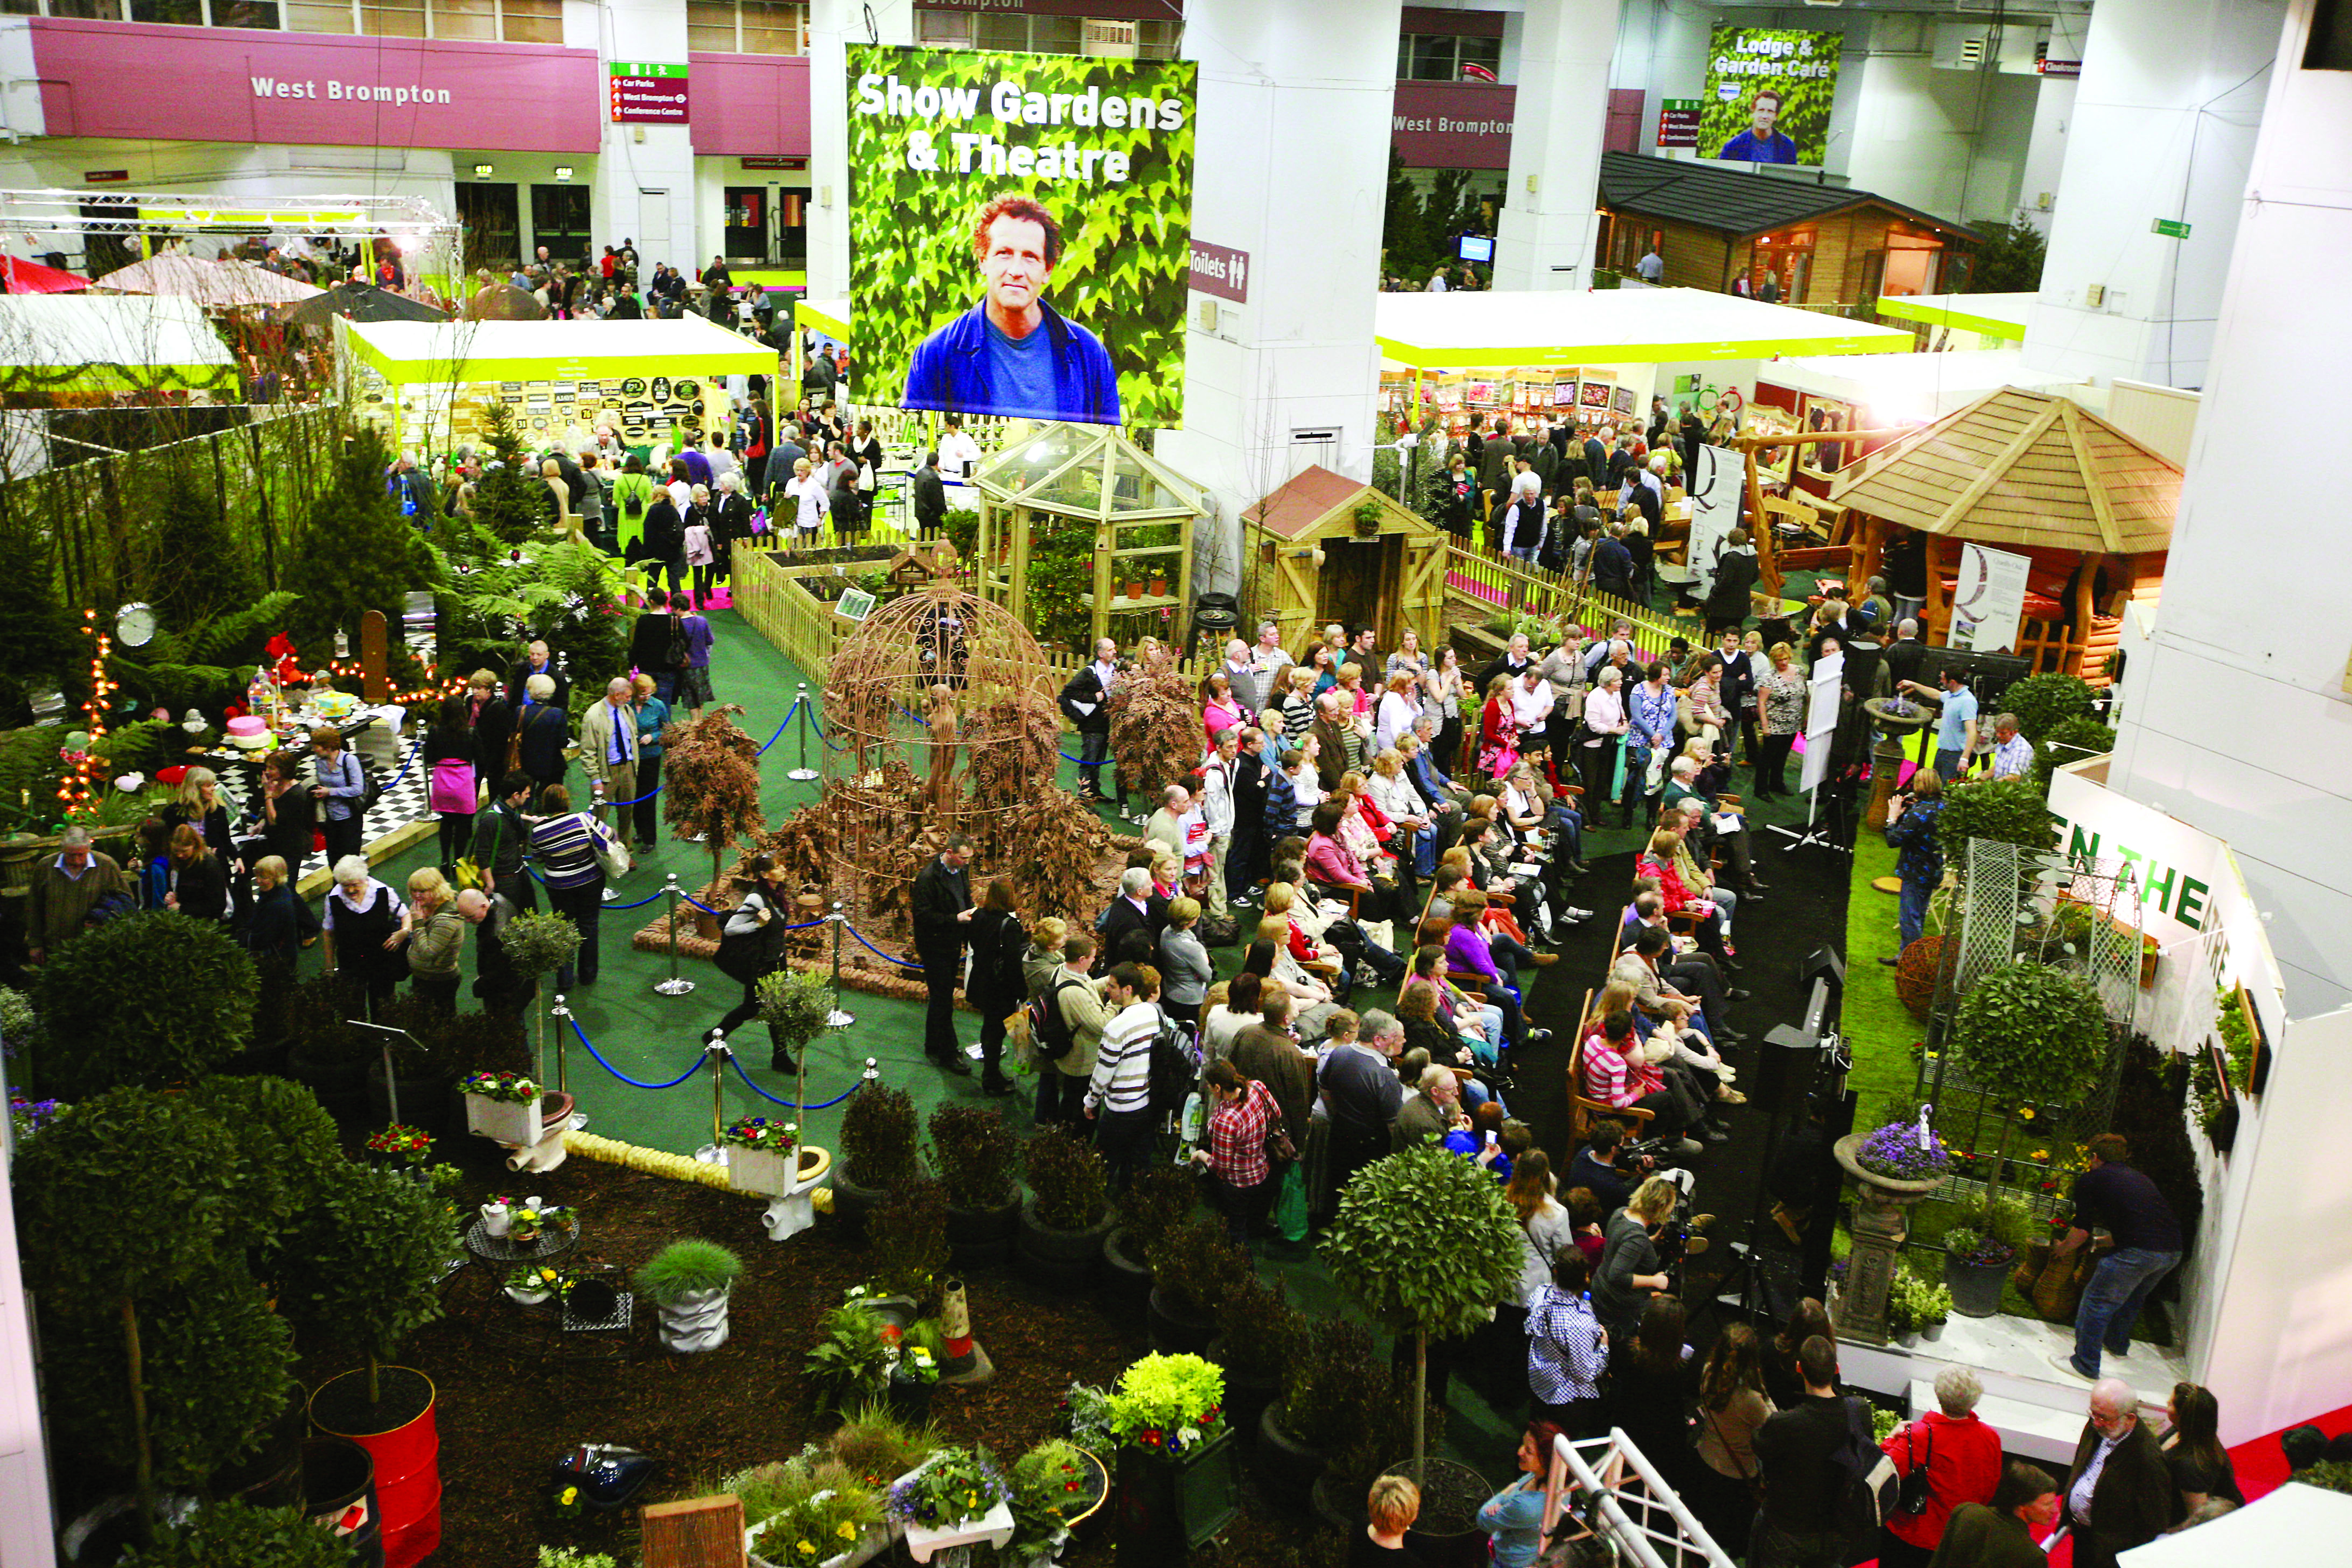 The Ideal Home Show